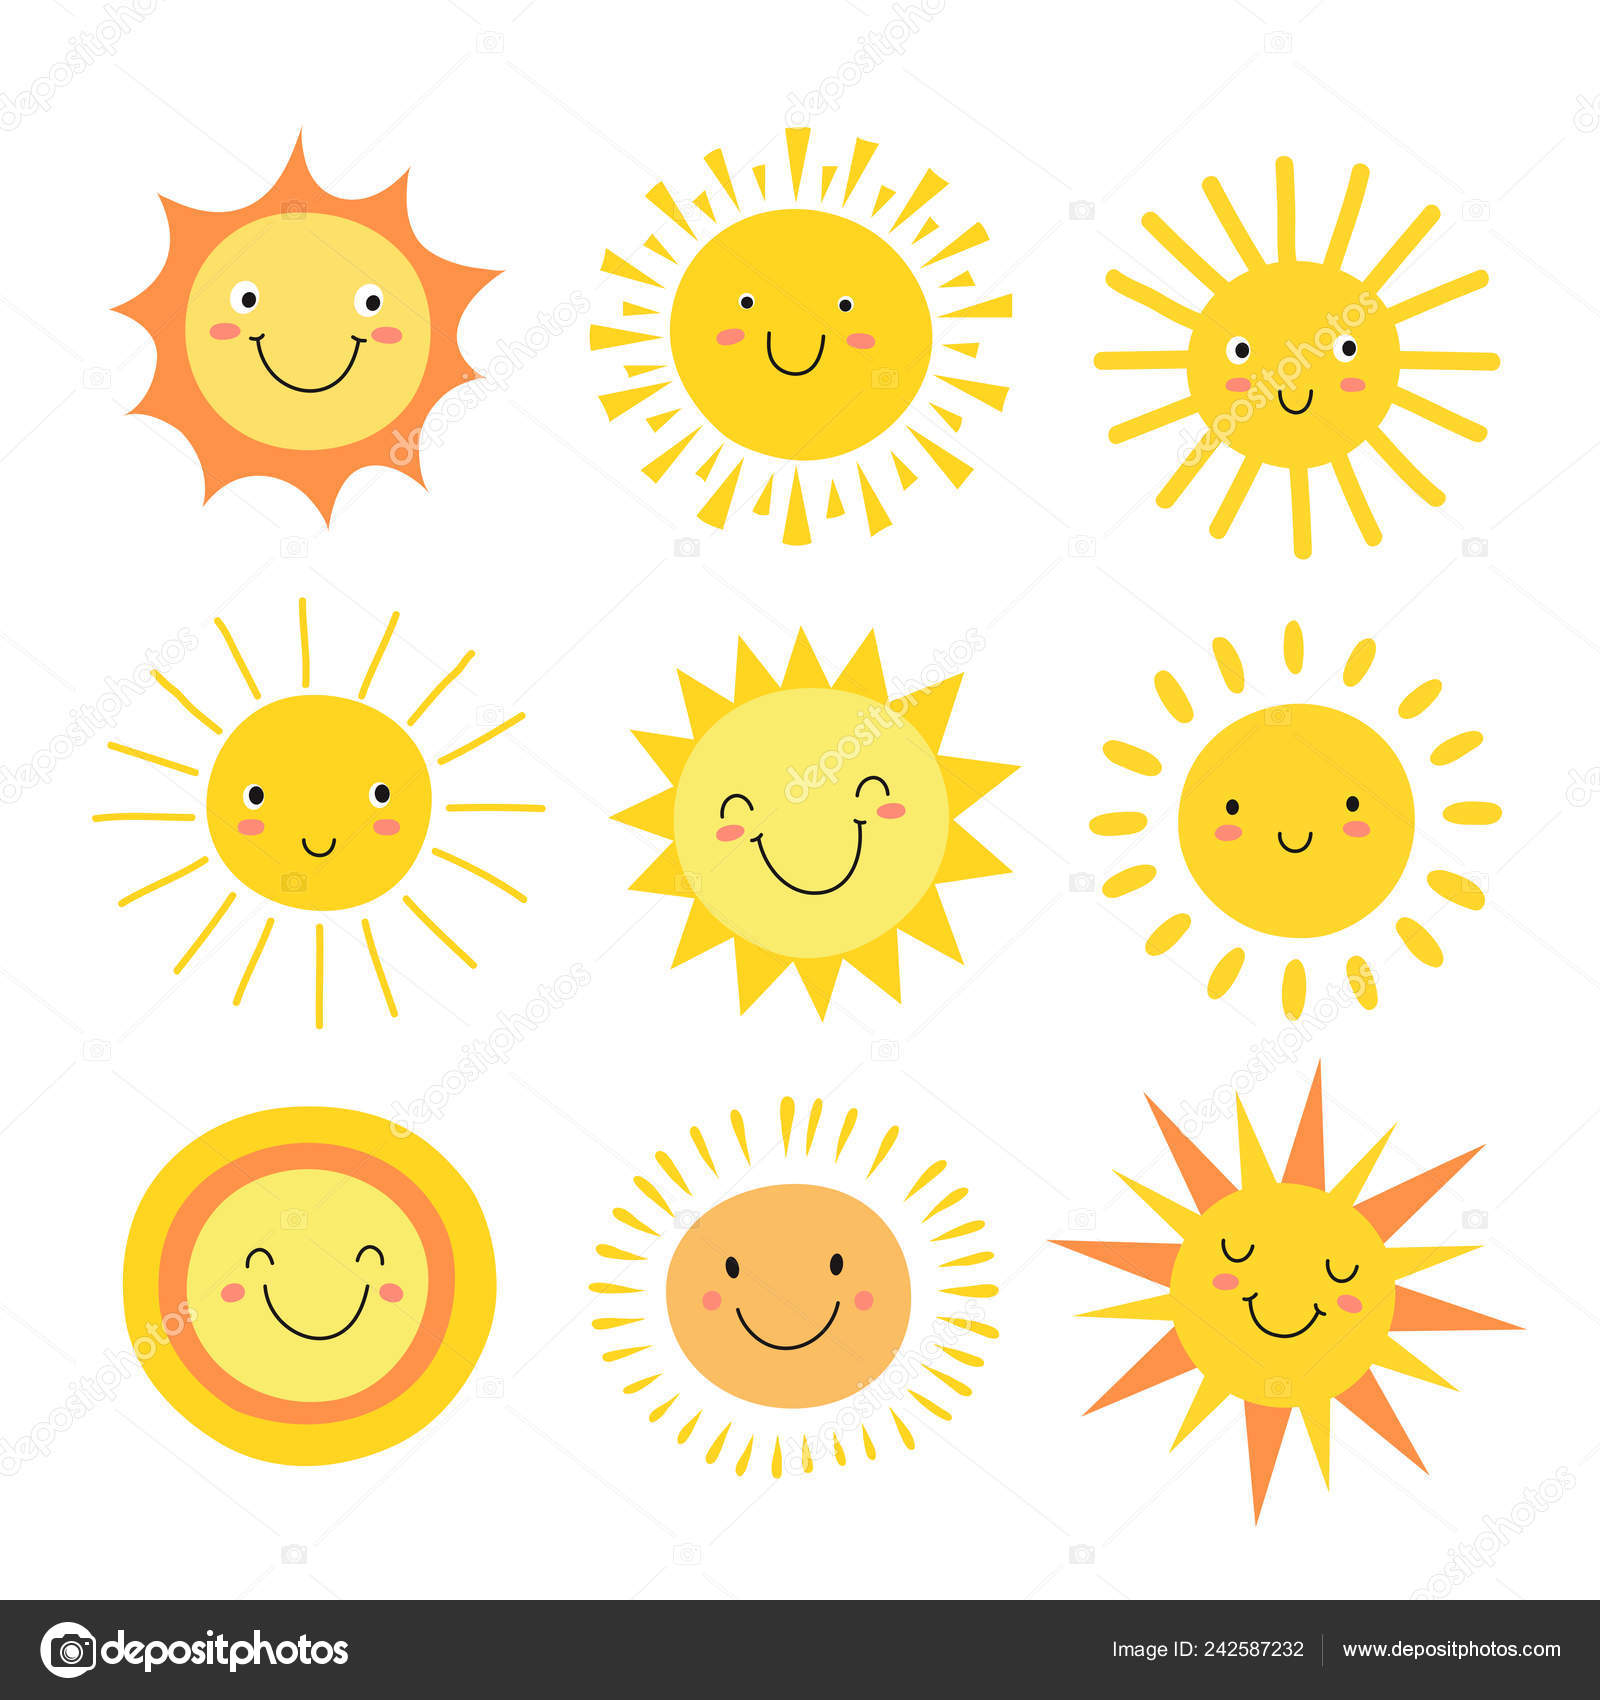 Sun Emoji Funny Summer Sunshine Sun Baby Happy Morning Emoticons Cartoon Sunny Smiling Faces Vector Icons Vector Image By C Microone Vector Stock 242587232